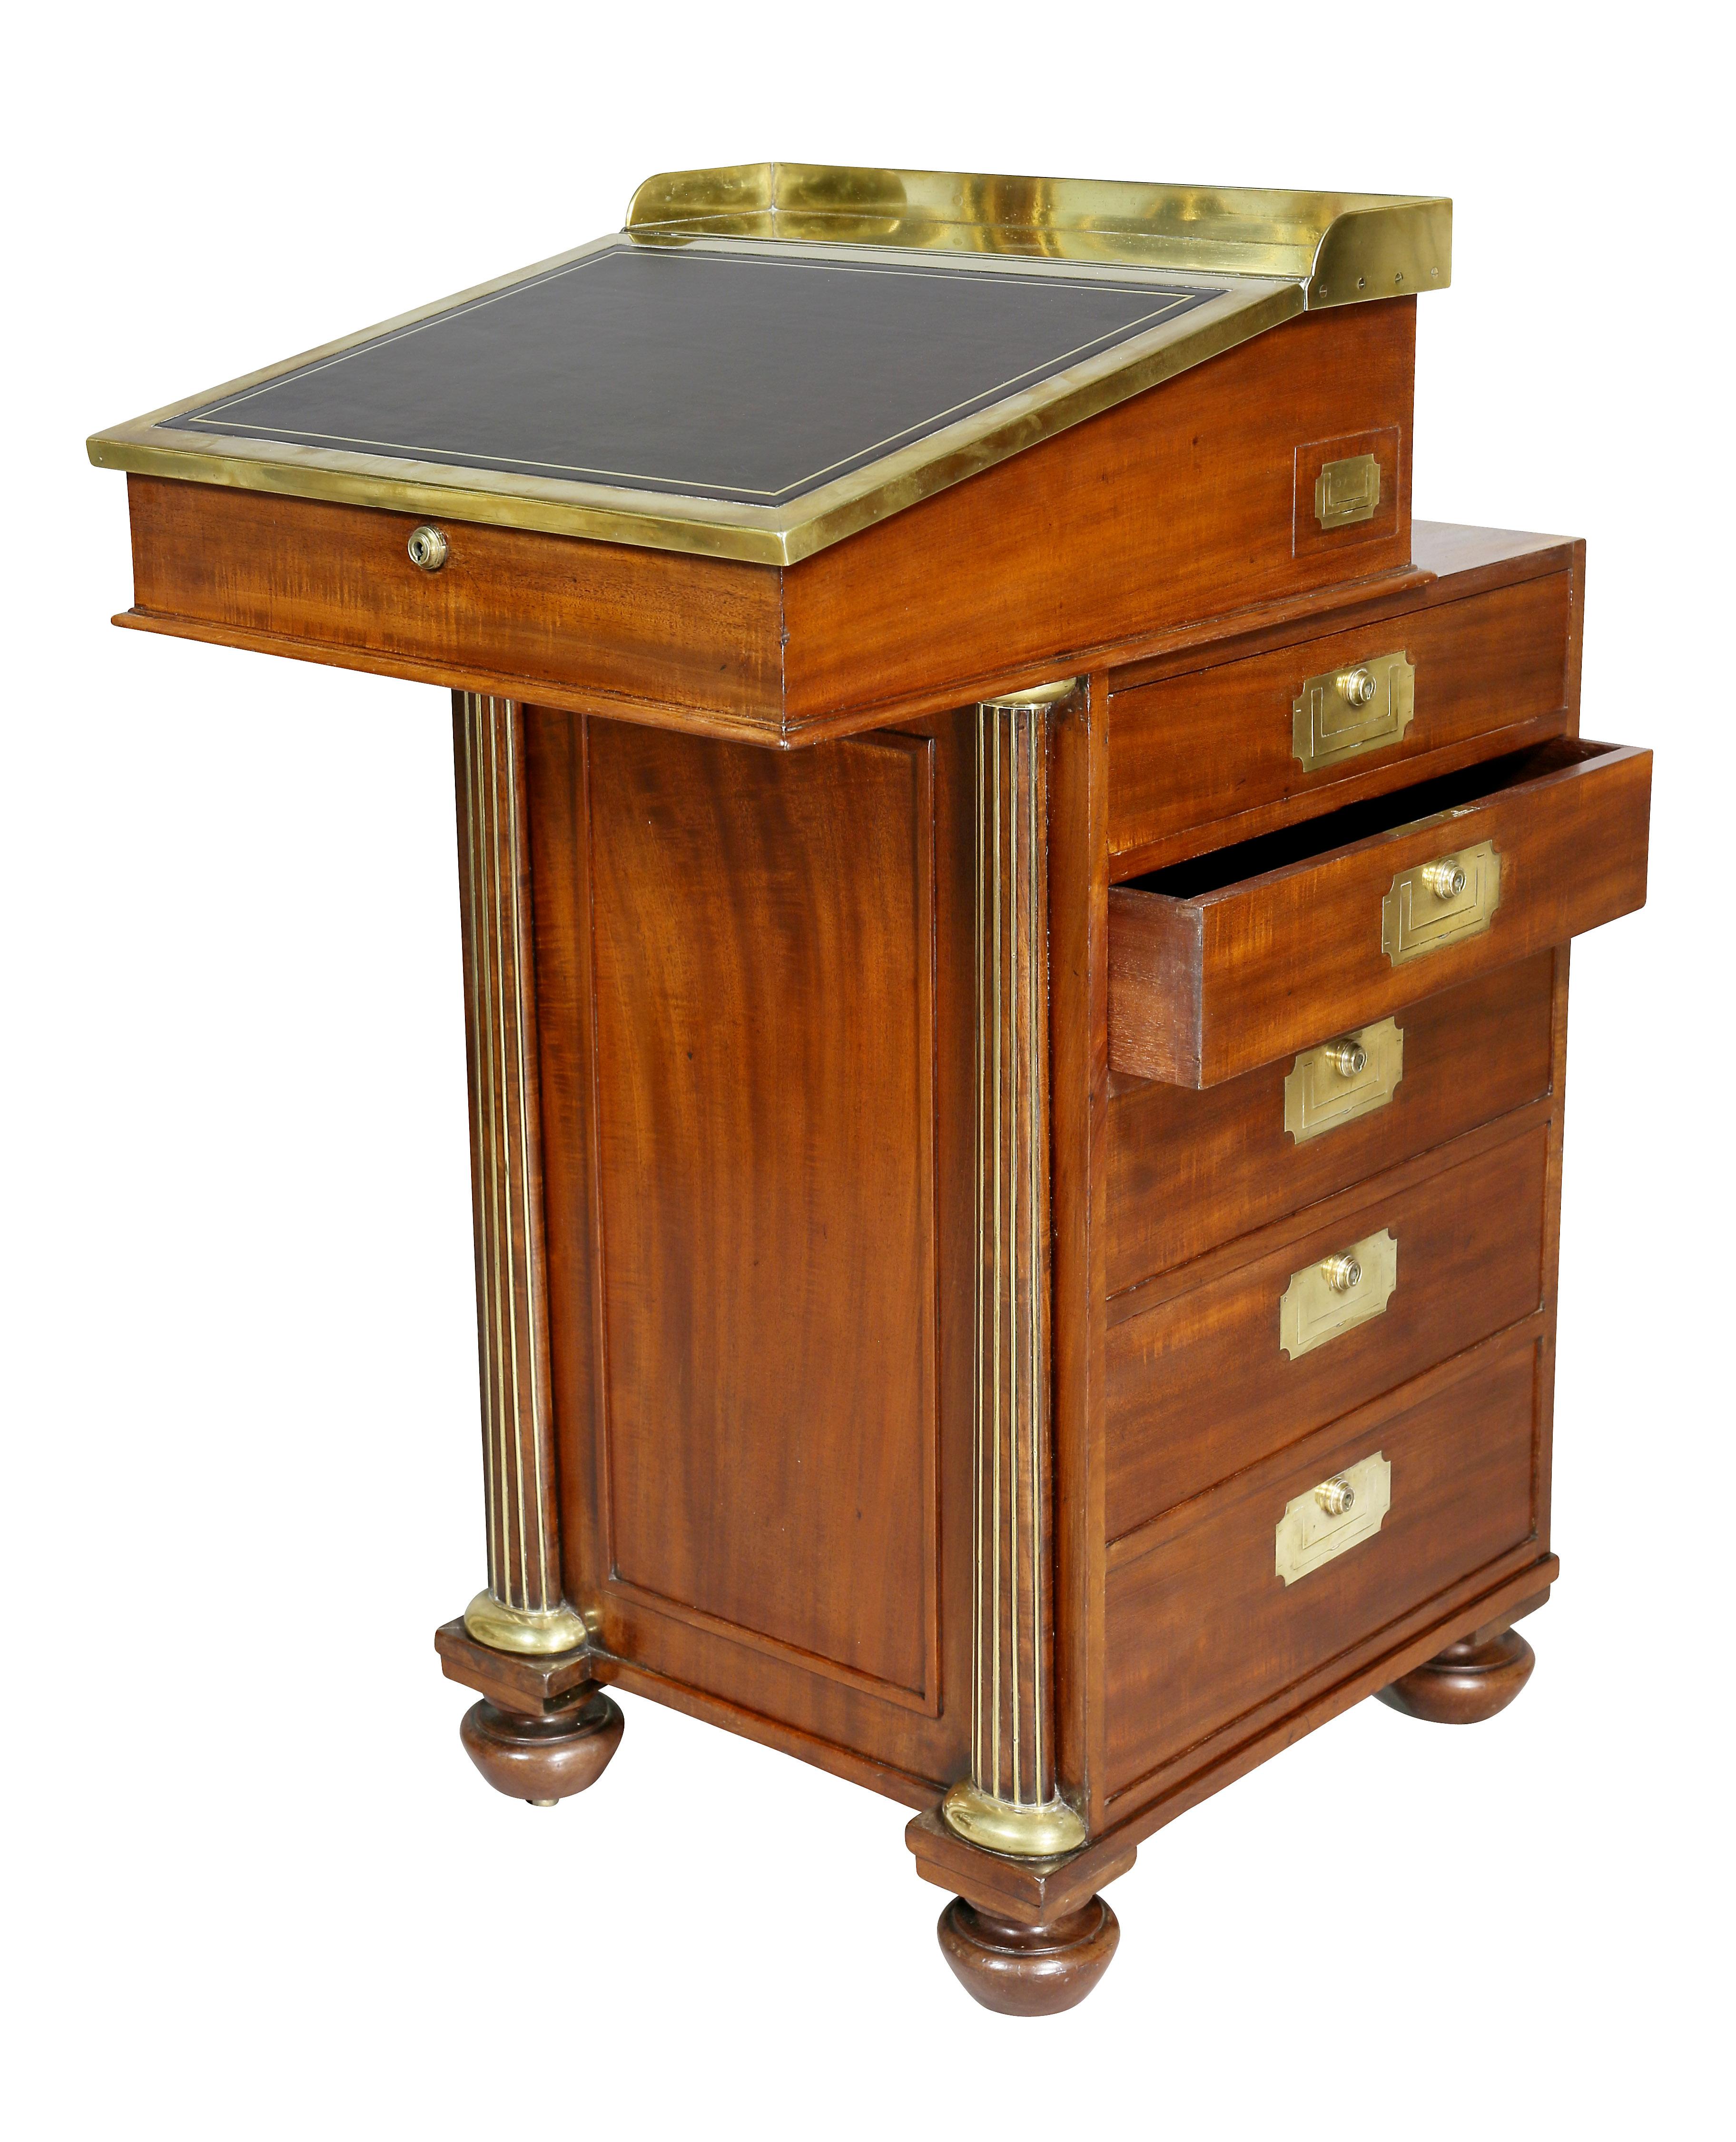 Early 19th Century Regency Mahogany and Brass Mounted Campaign Desk